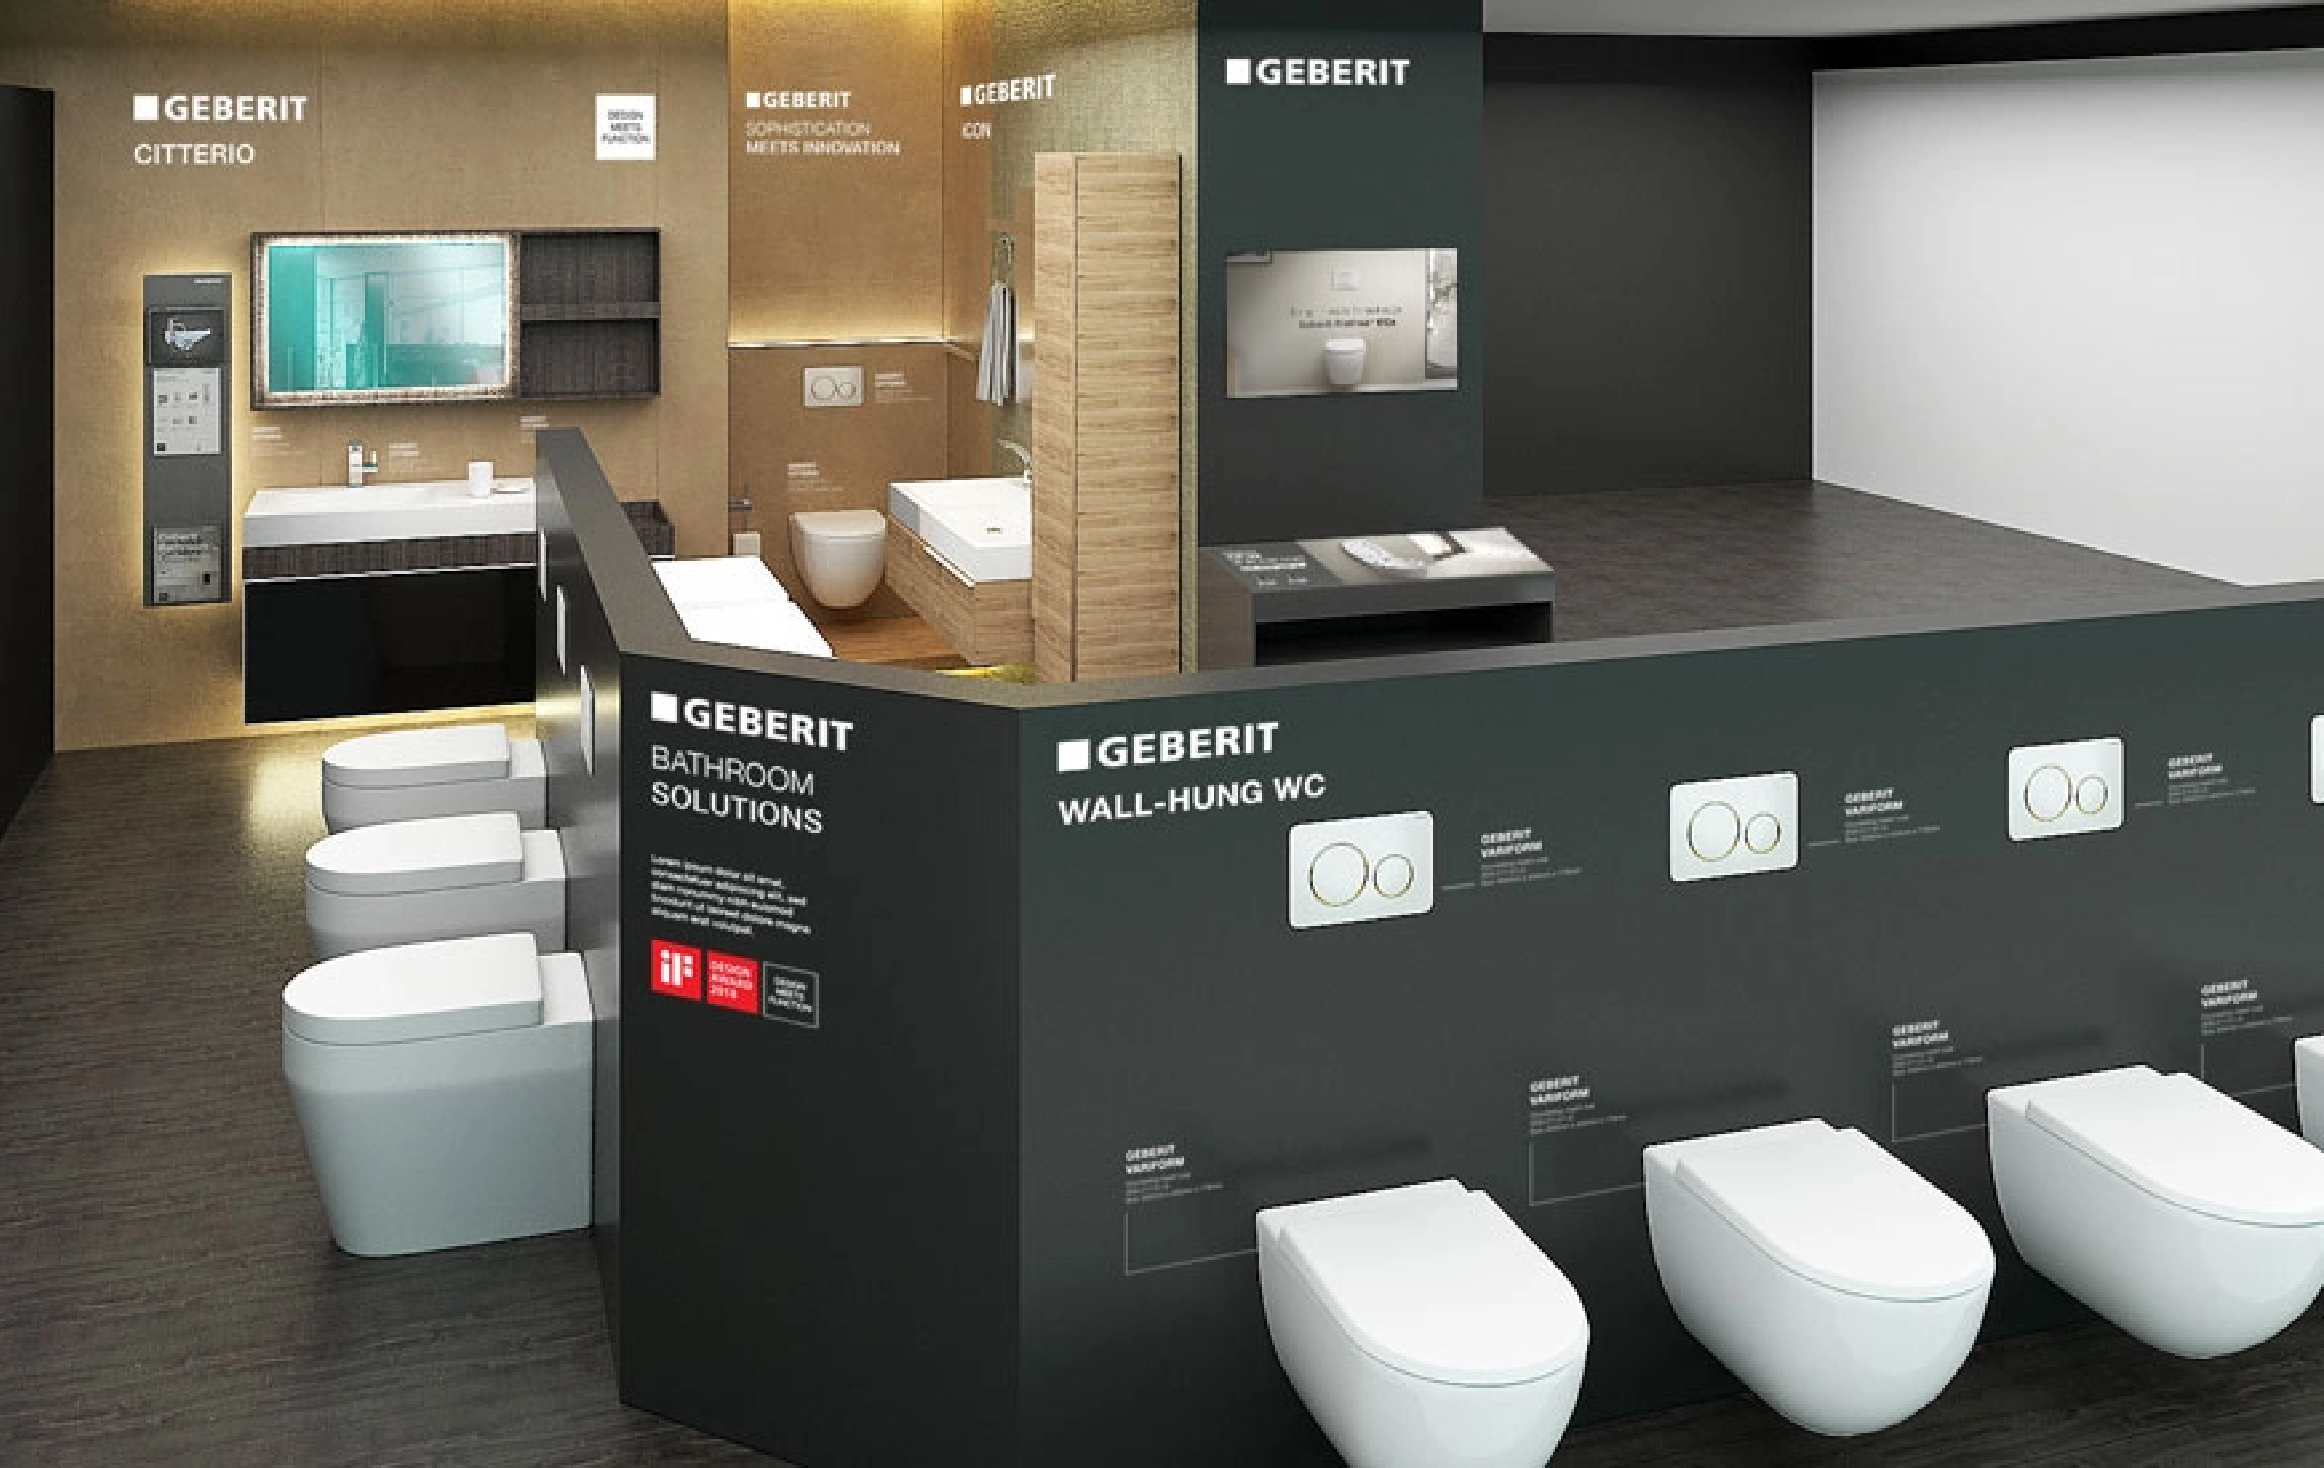 Curated shopping journey display developed by Fuchsia Retail for Geberit